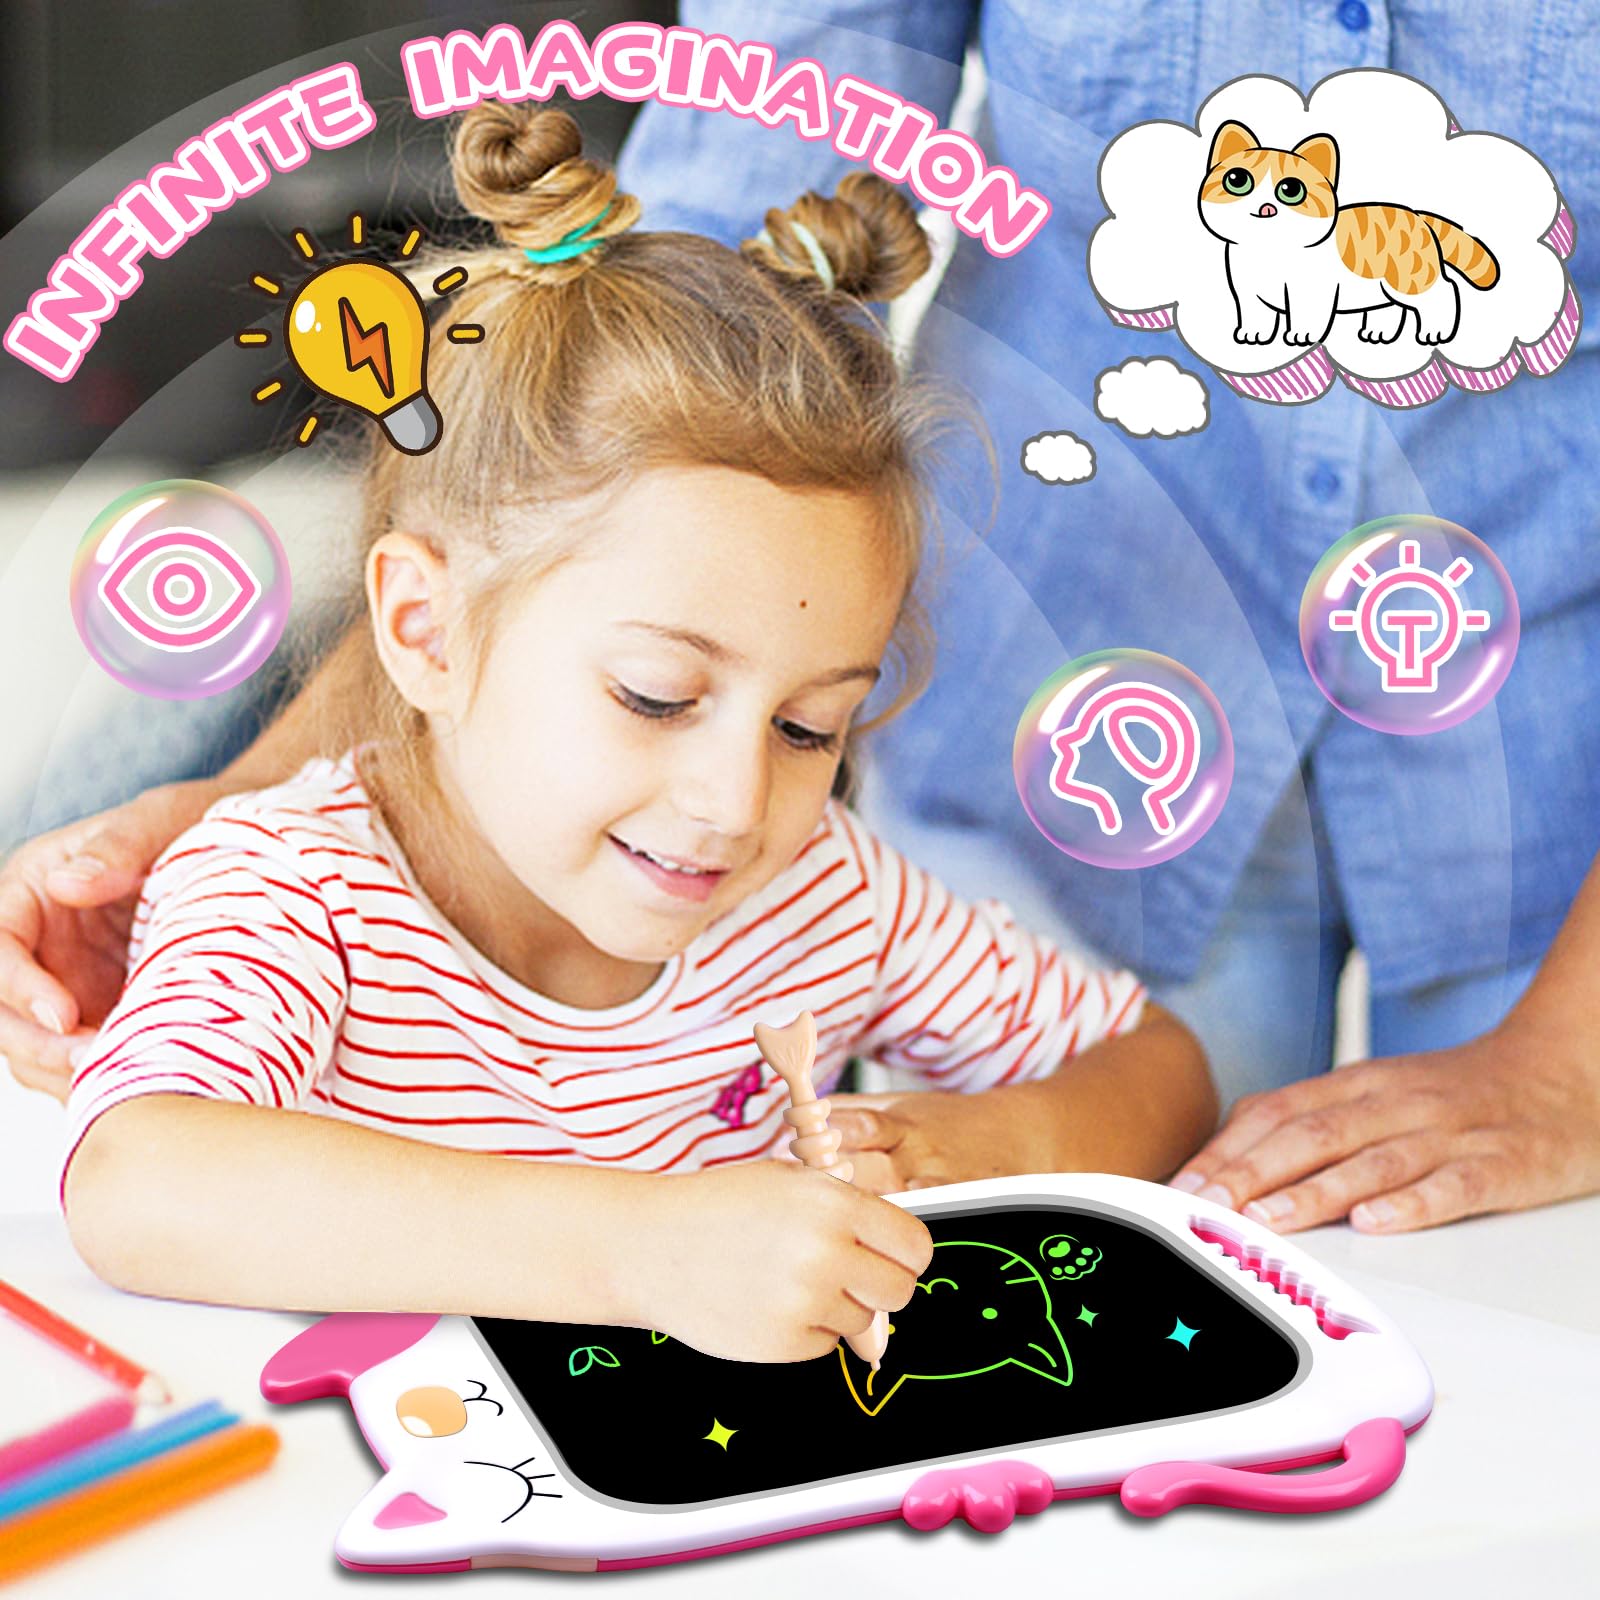 GJZZ Drawing Doodle Board Girls Toys for 3 4 5 Year Old Girl Birthday Gift Ideas - Writing Board for Kids Ages 2-4, 6, 7, Toddler Educational Learning Toys - Pink White